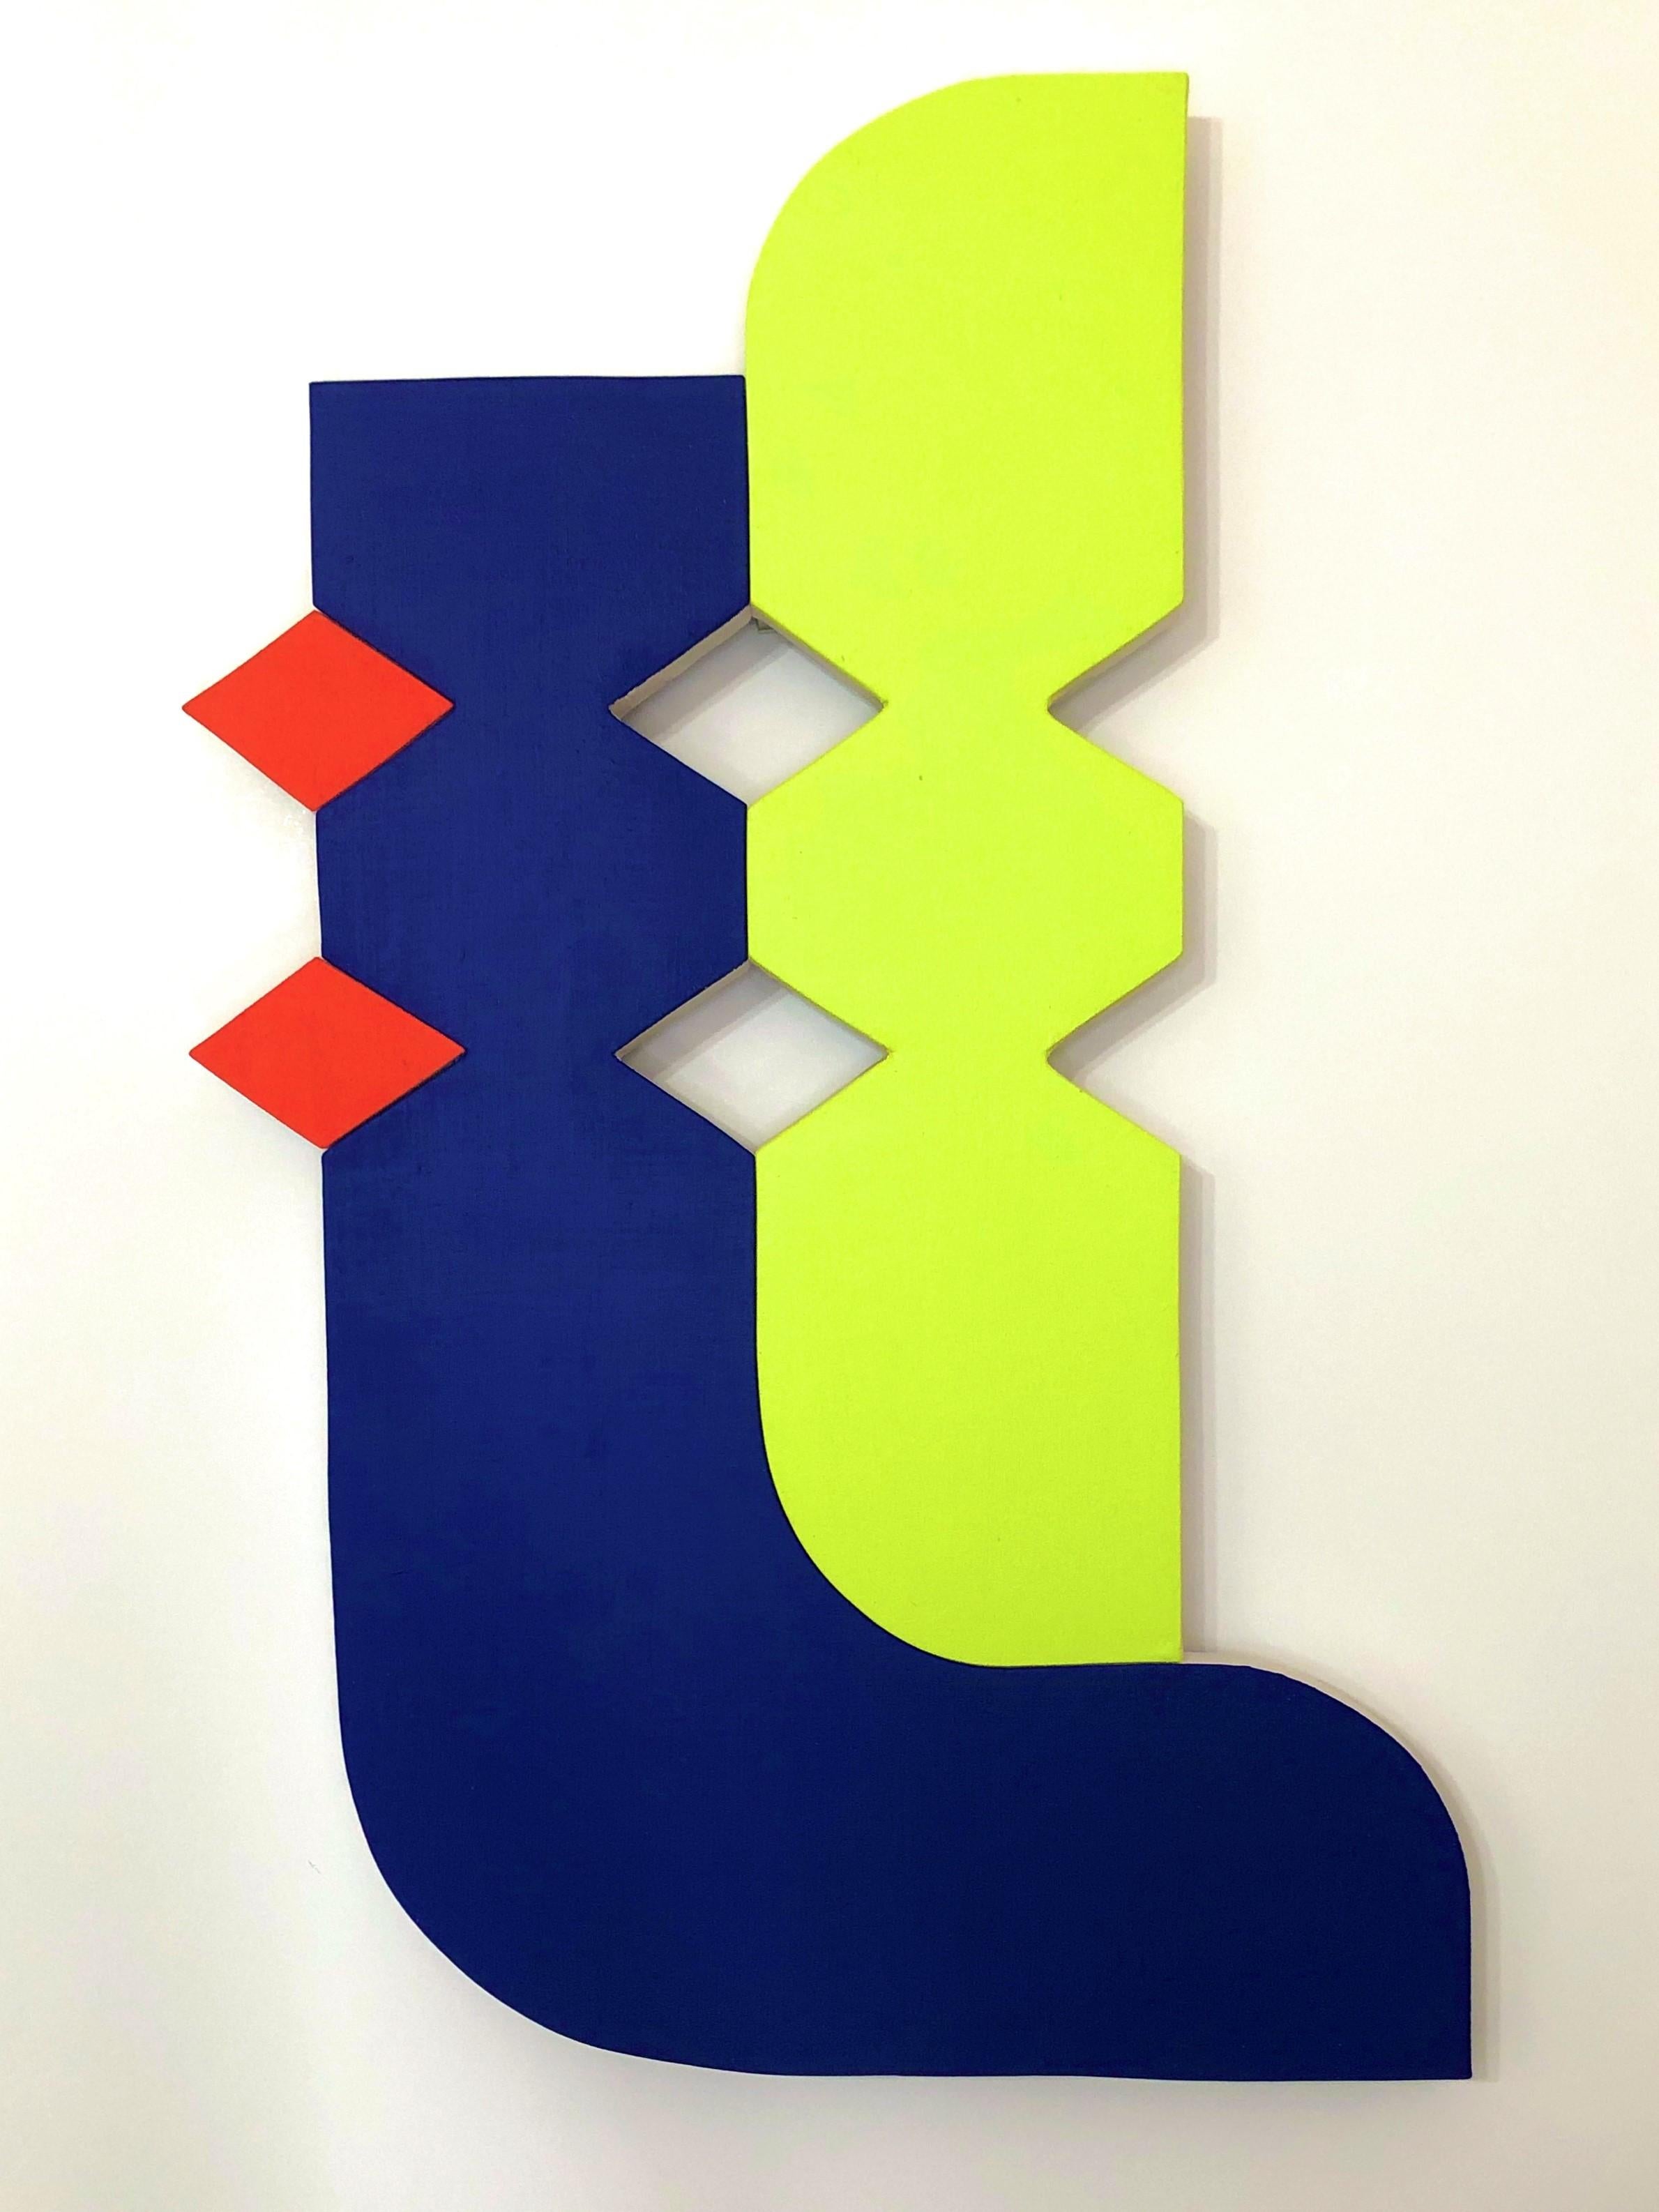 Jason Matherly Abstract Painting - "21-13" Mixed Media Wall Sculpture painting- navy blue, green yellow, red, bold